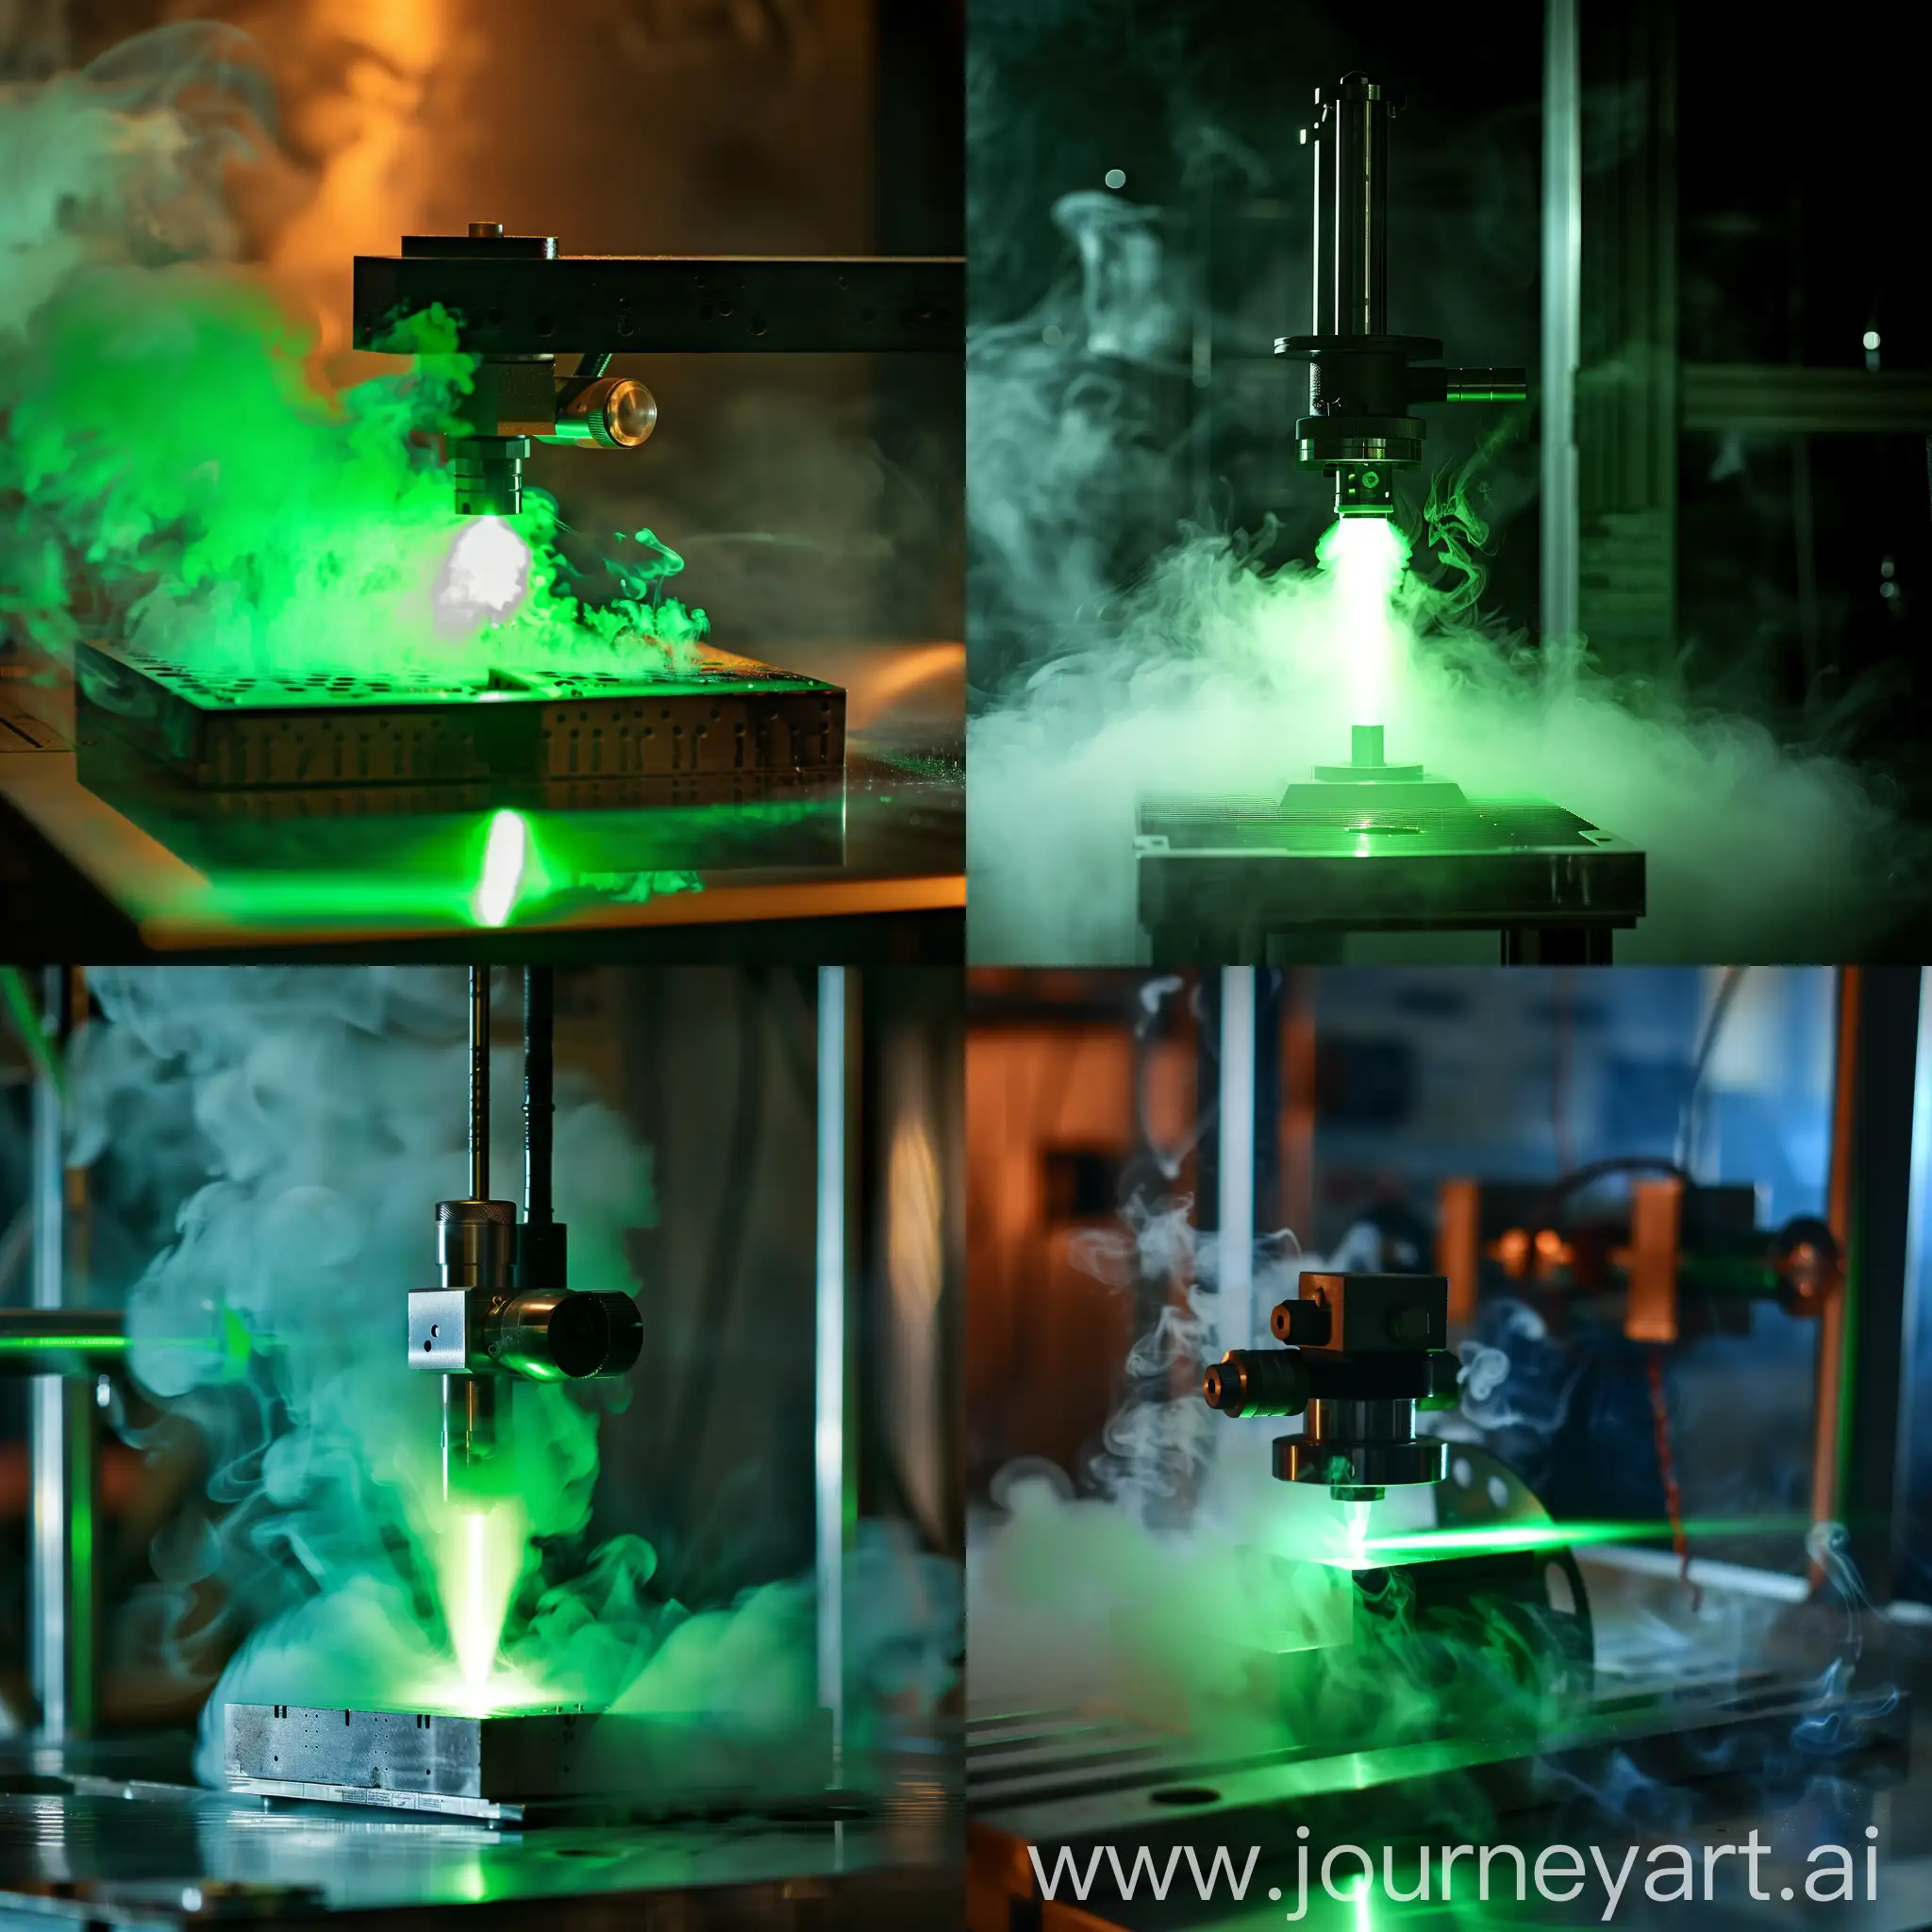 Laboratory-Laser-Experiment-with-Green-Beam-on-Smoking-Metal-Device